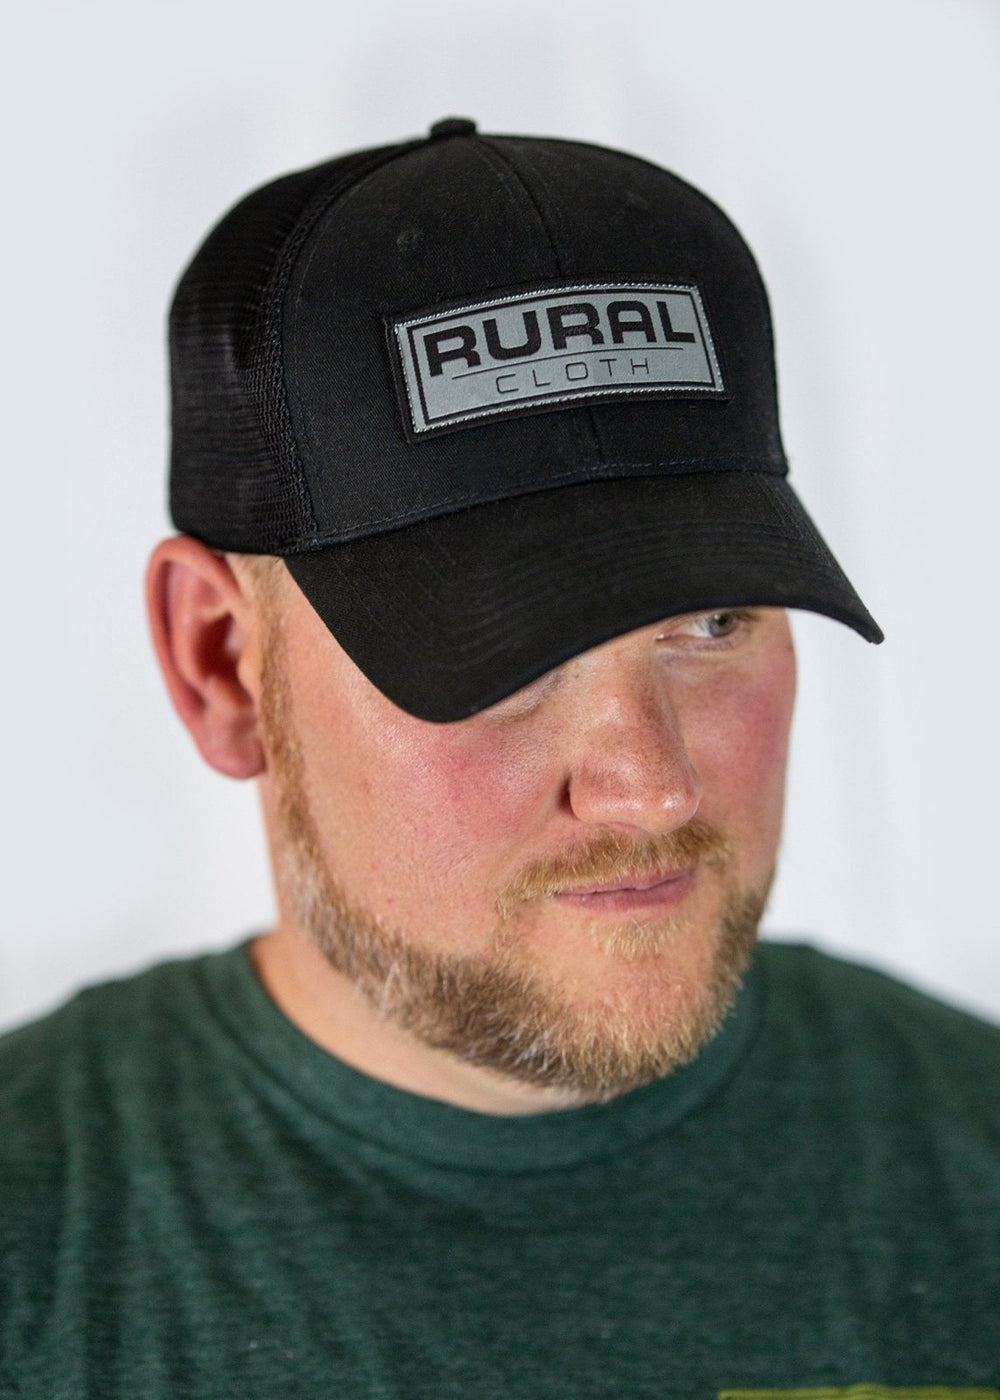 The image shows a bearded man wearing a dark green t-shirt and the Brandmark Hat from Rural Cloth, an adjustable snapback black baseball cap featuring a rectangular patch on the front that reads "RURAL CLOTH." He is gazing slightly to the side against a plain, light-colored background.